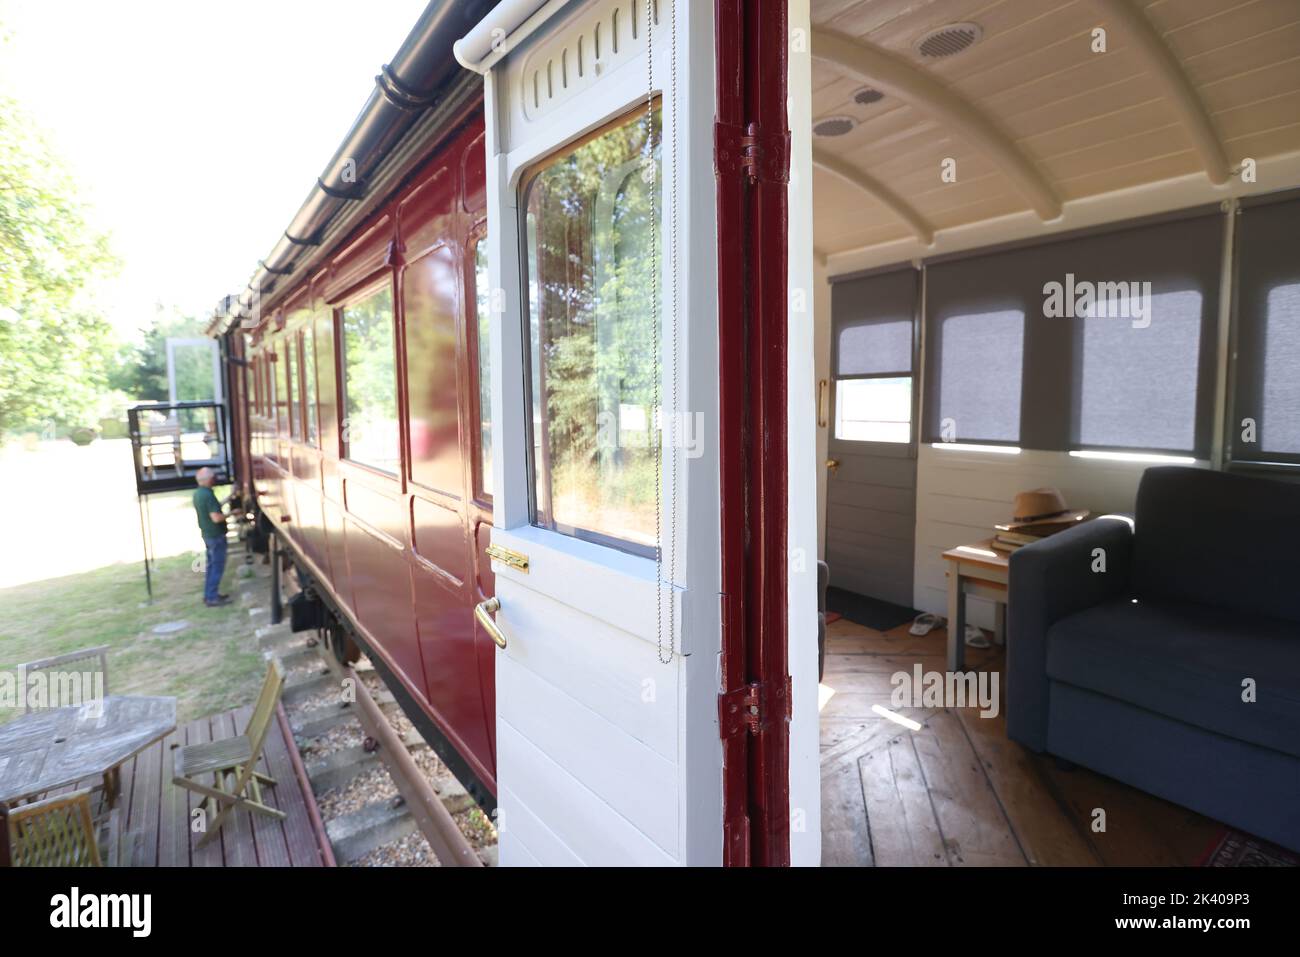 James Waters (with Dad Robin) alongside the 1880s train carriage which they one an award for as a quirky holiday letting property, Halstead, Essex UK Stock Photo